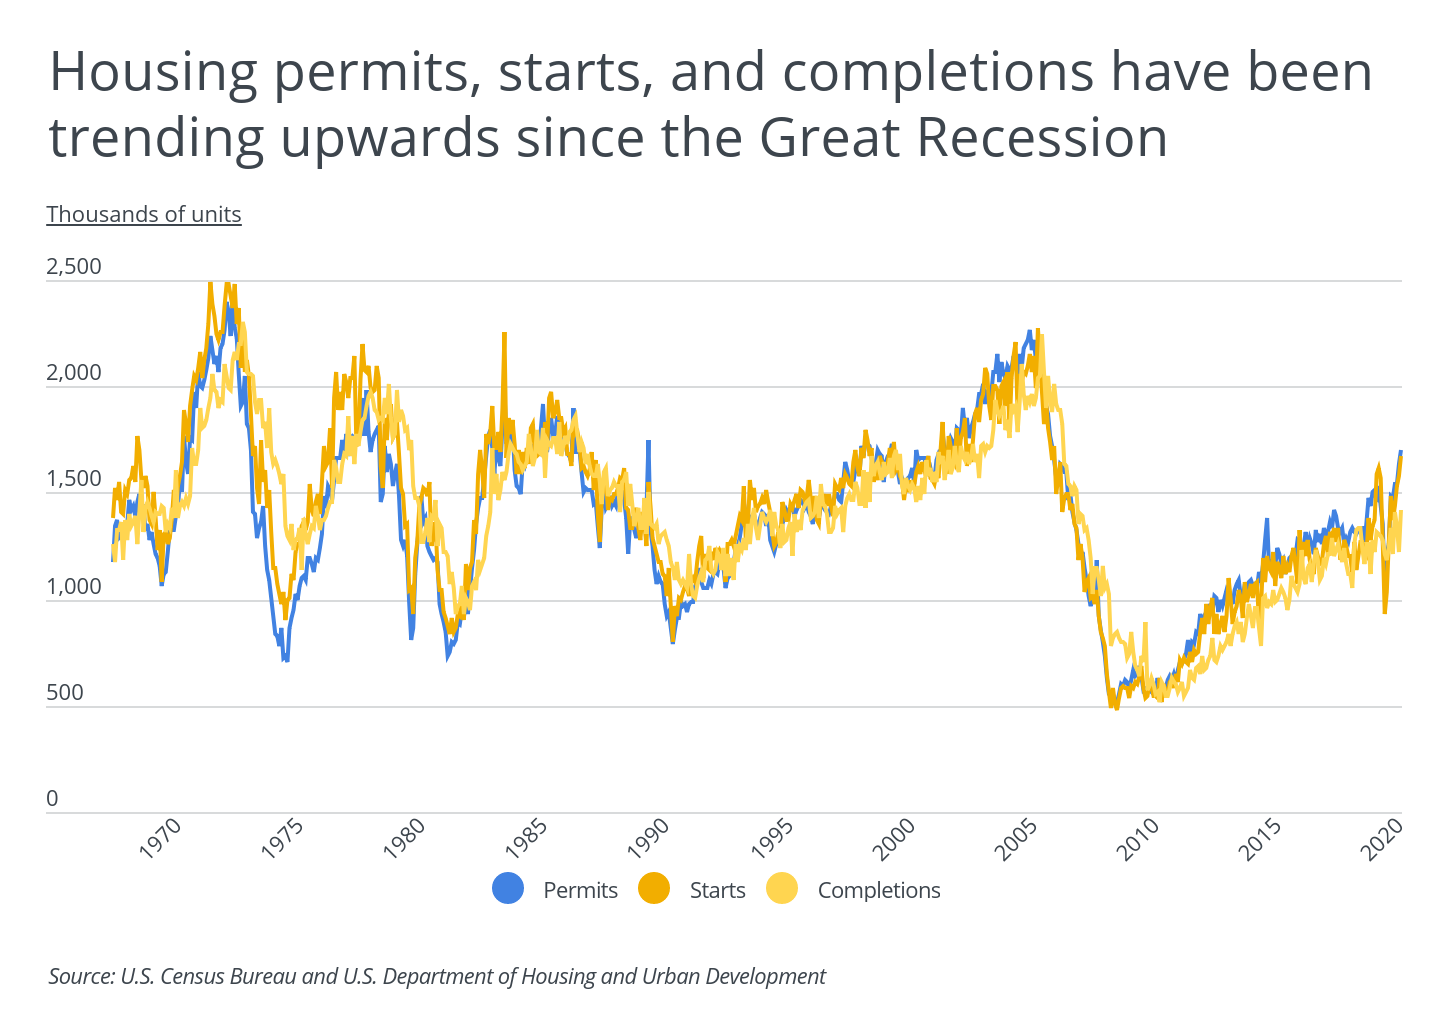 Housing permits, starts, and completions have been trending upwards since the Great Recession